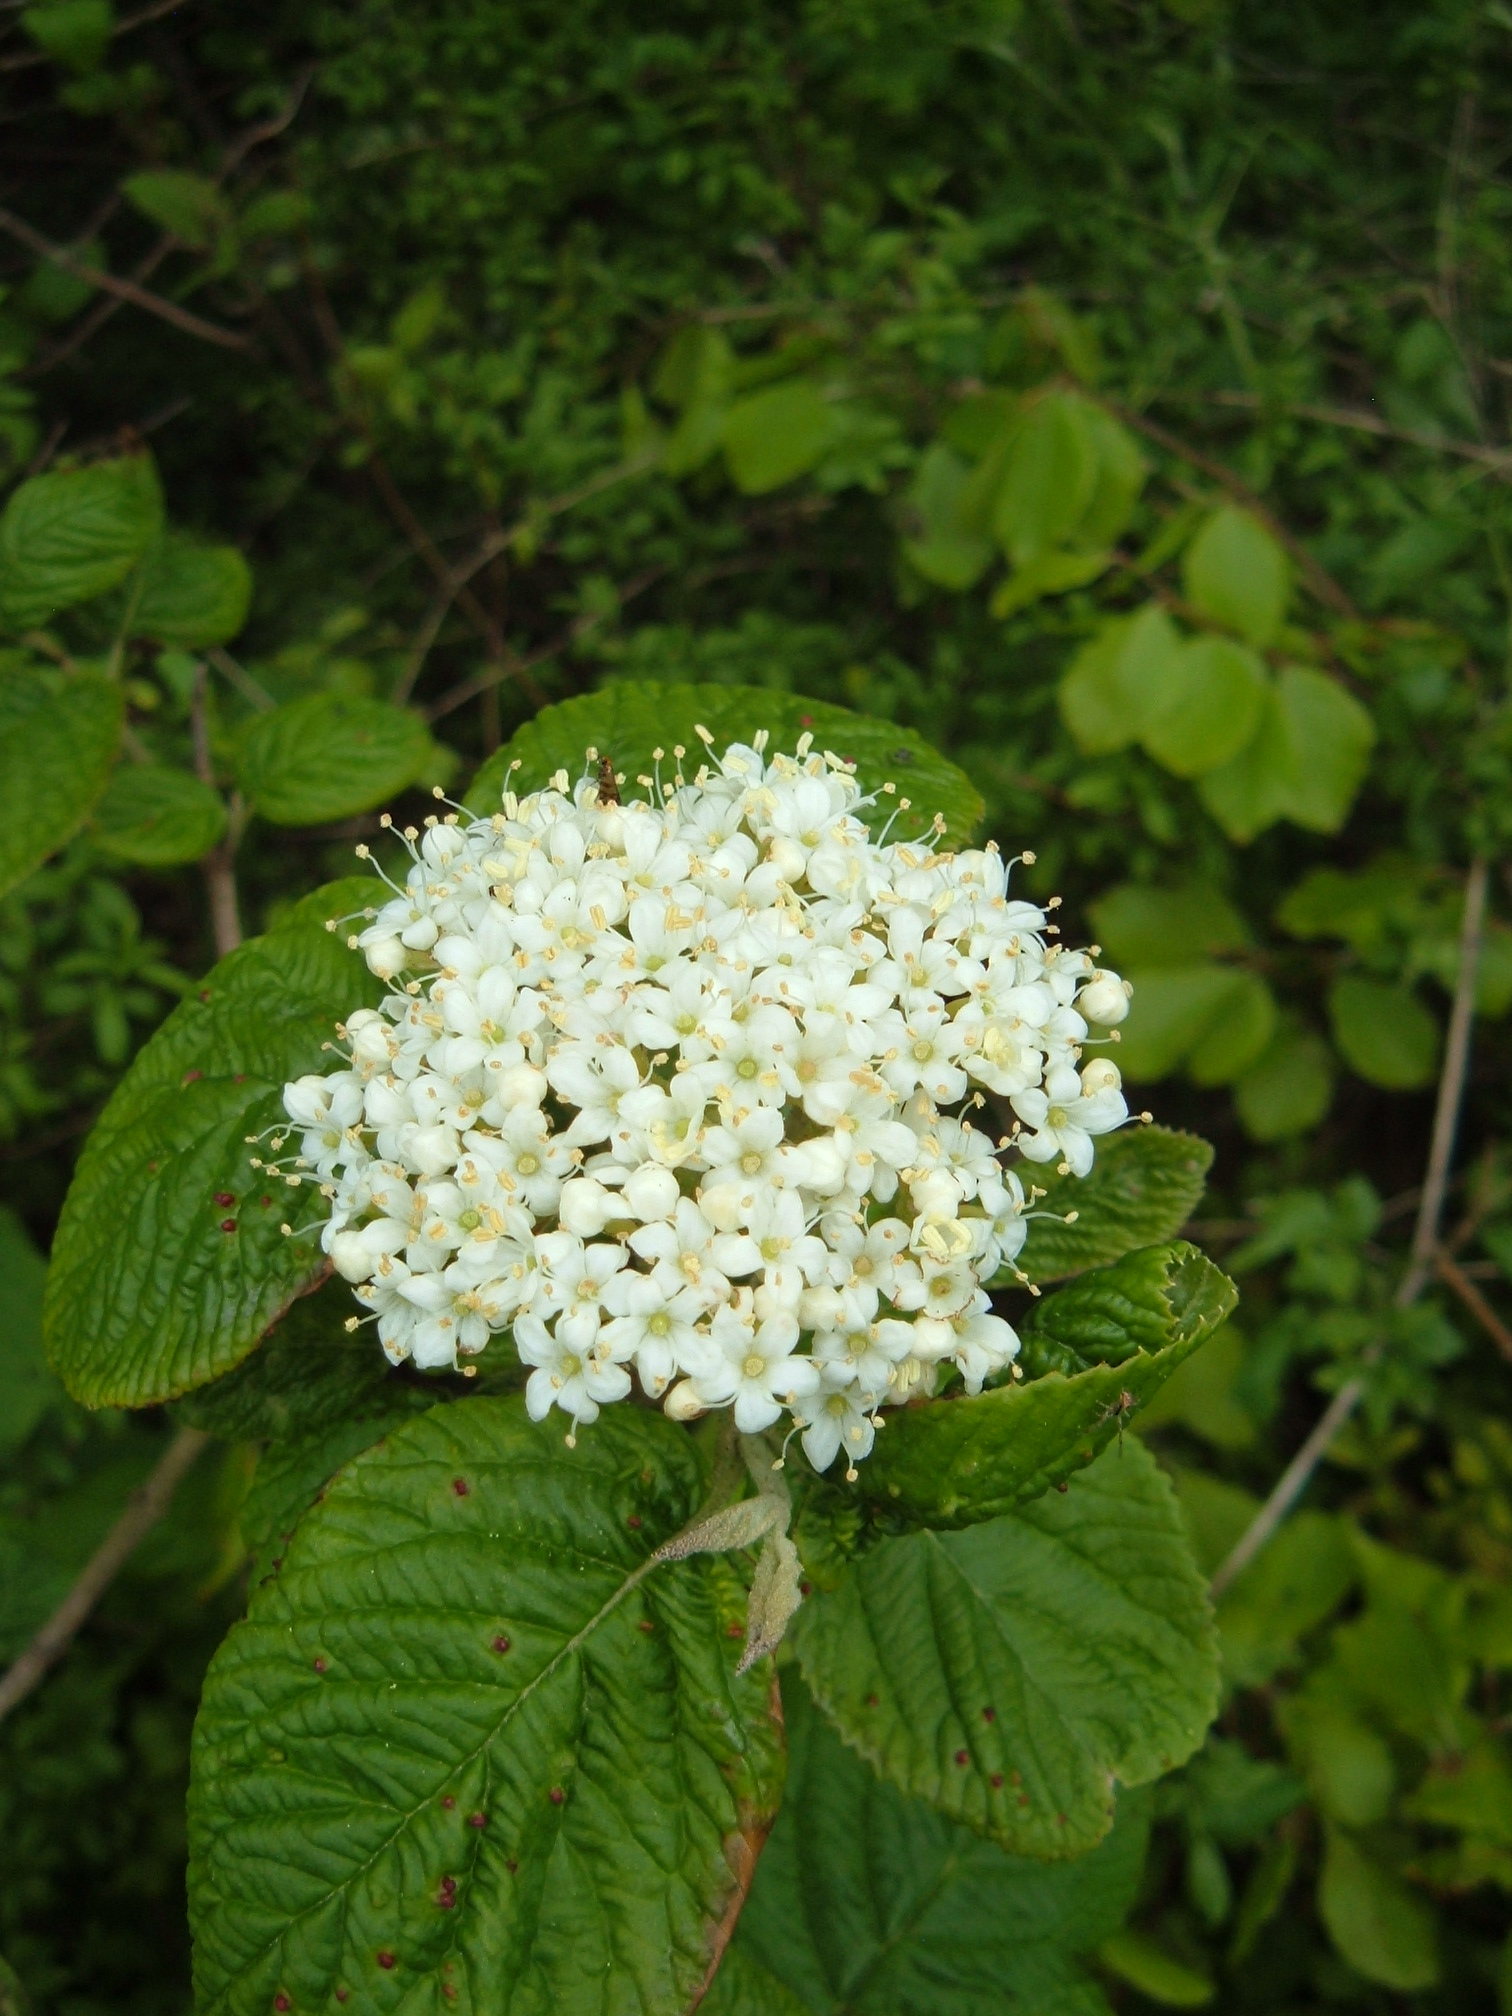 a flower with several small flowers on it